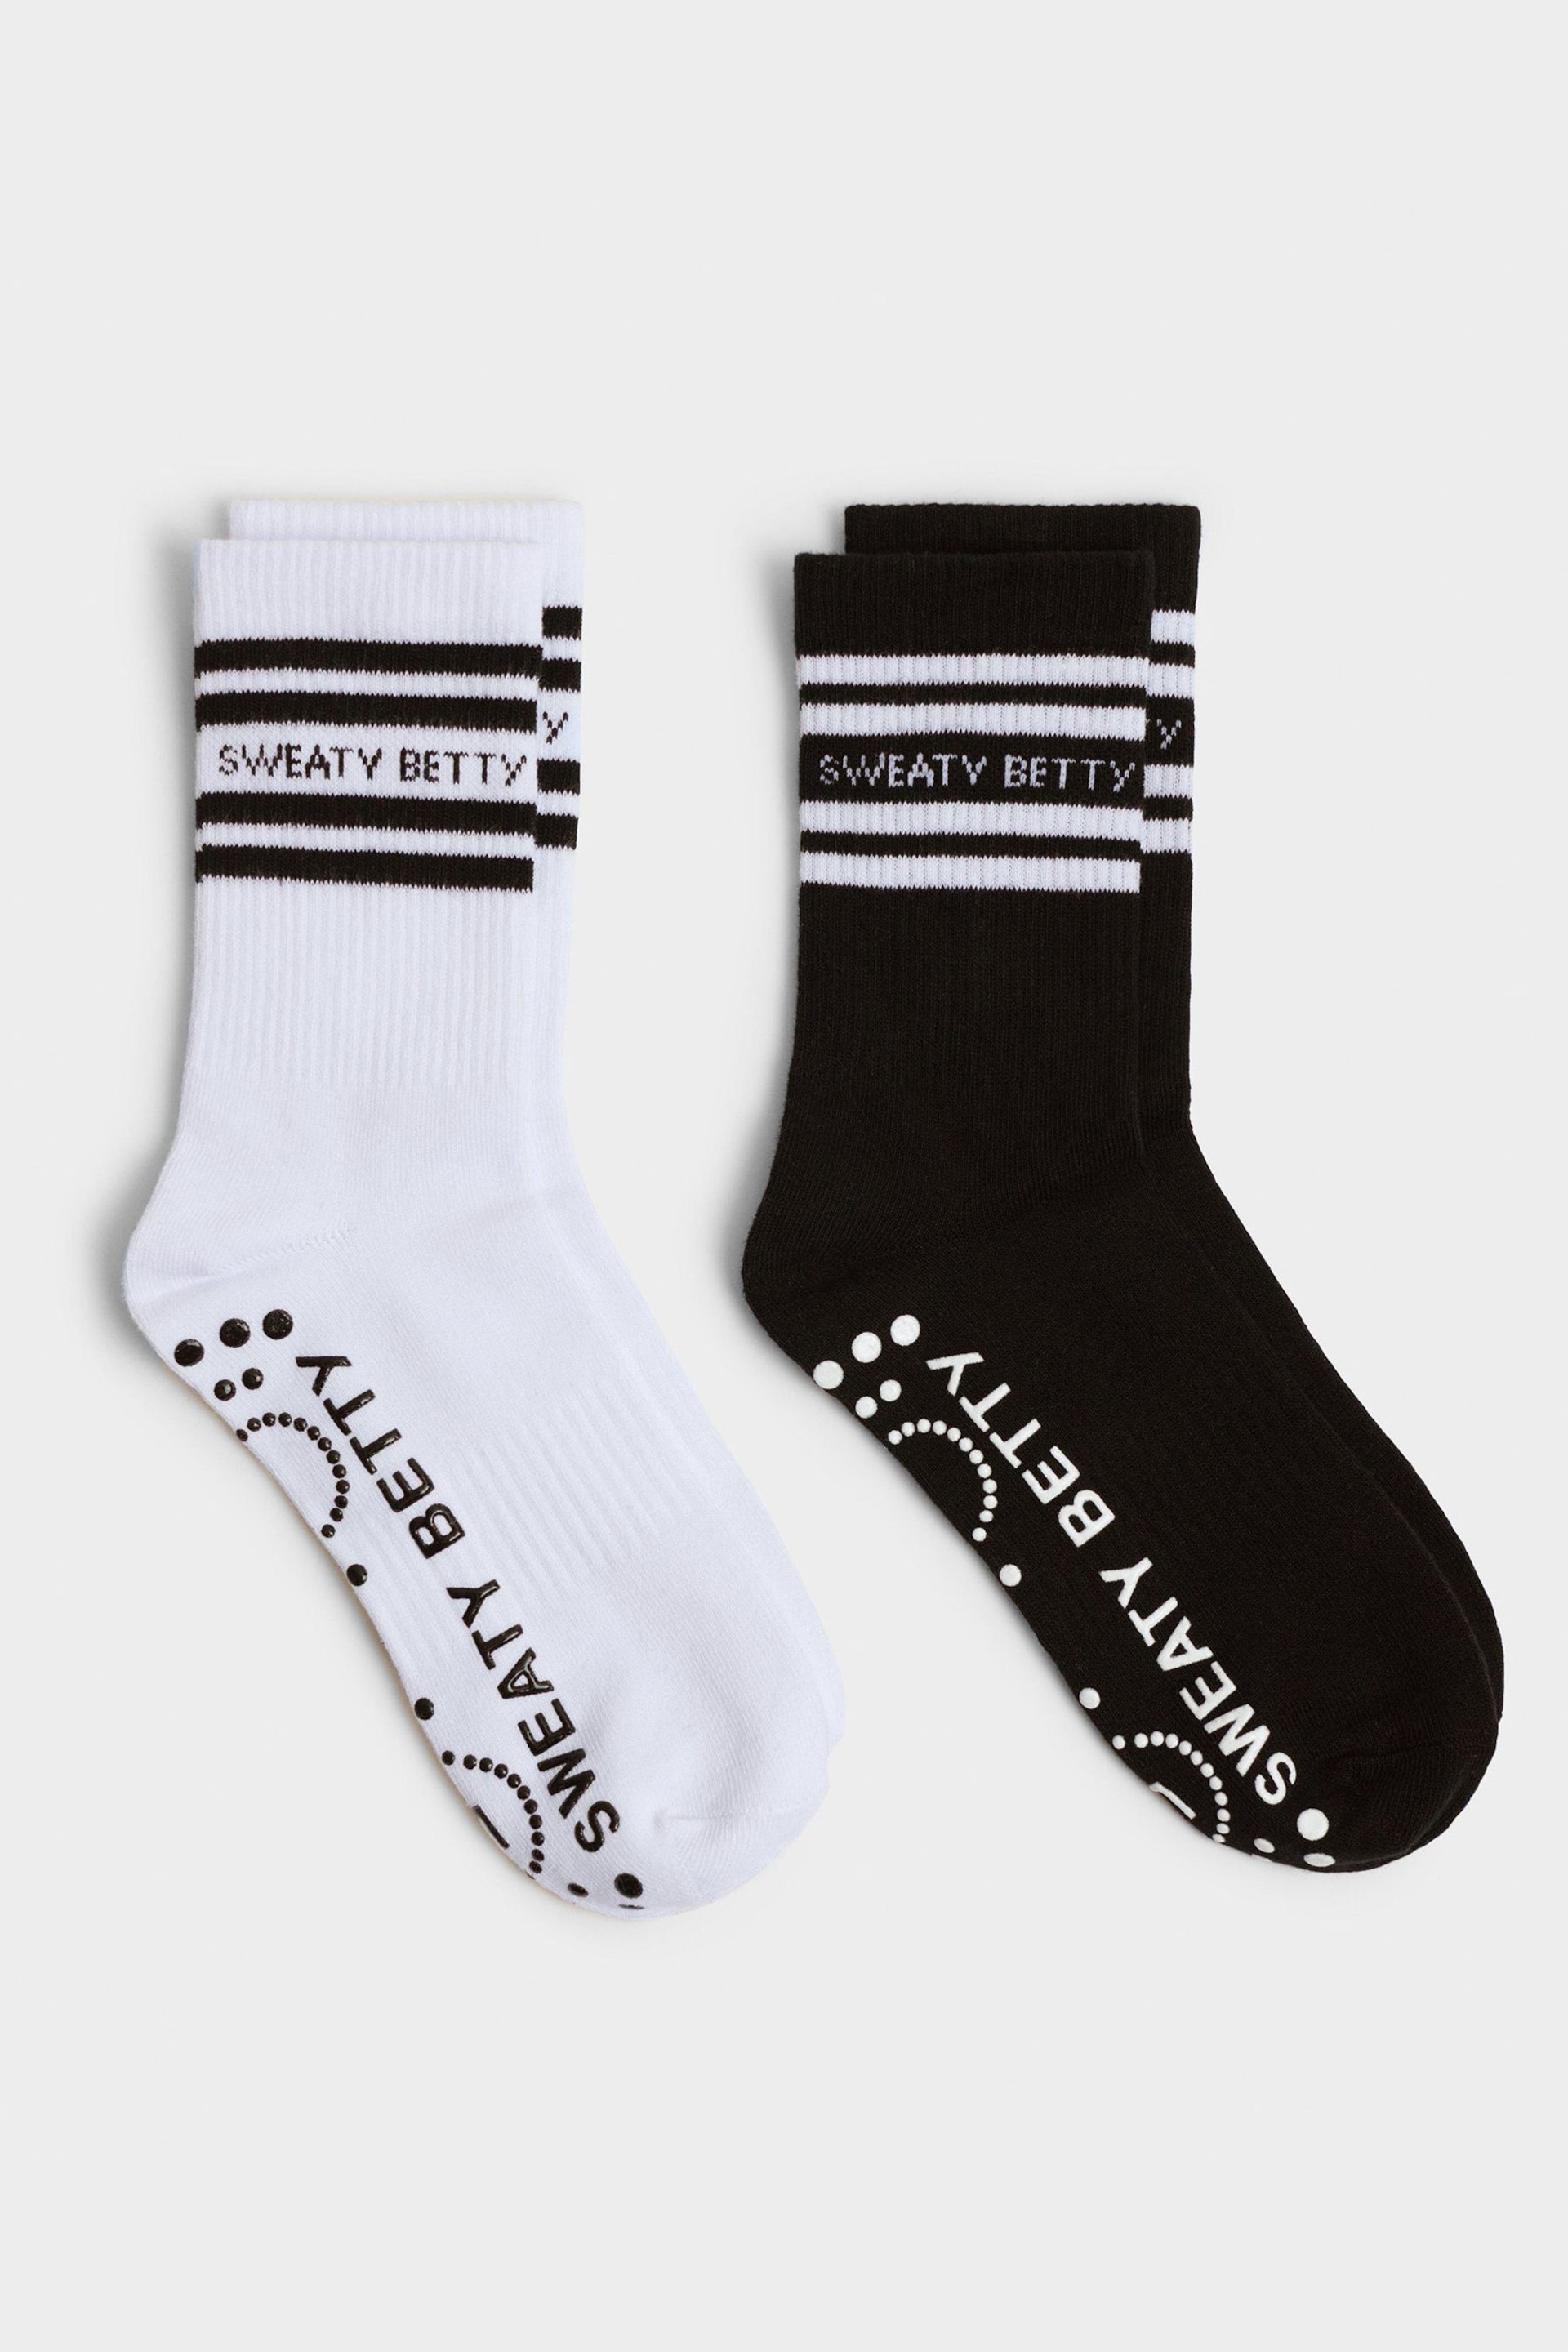 Sweaty Betty White Mid Length Ankle Gripper Socks 2 Pack - Image 3 of 3